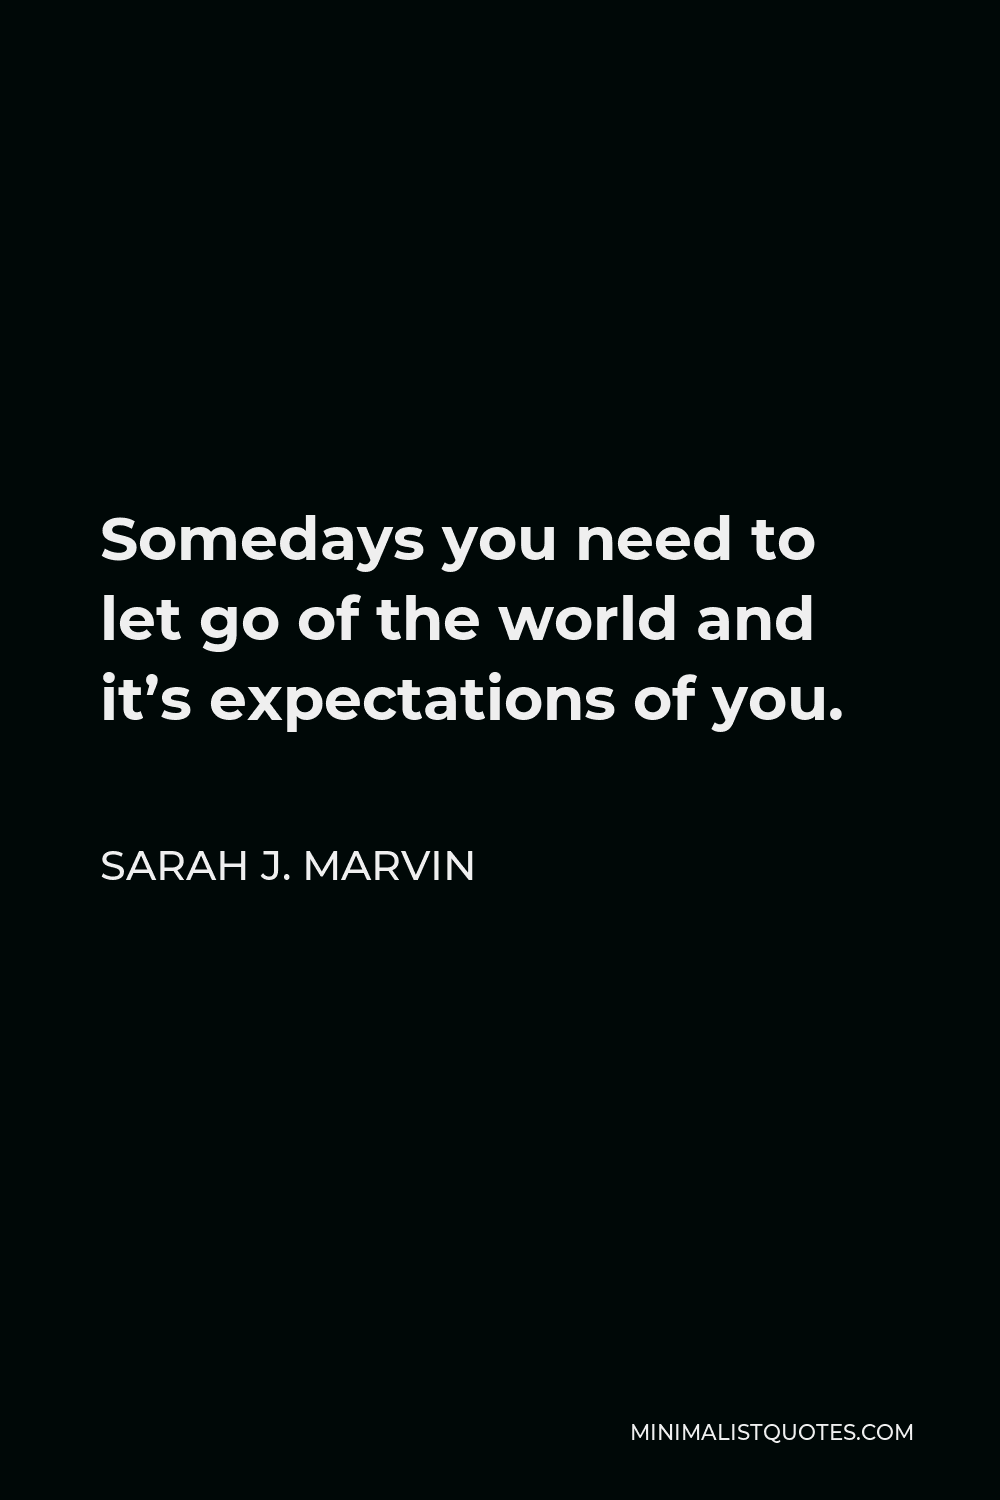 Sarah J. Marvin Quote - Somedays you need to let go of the world and it’s expectations of you.